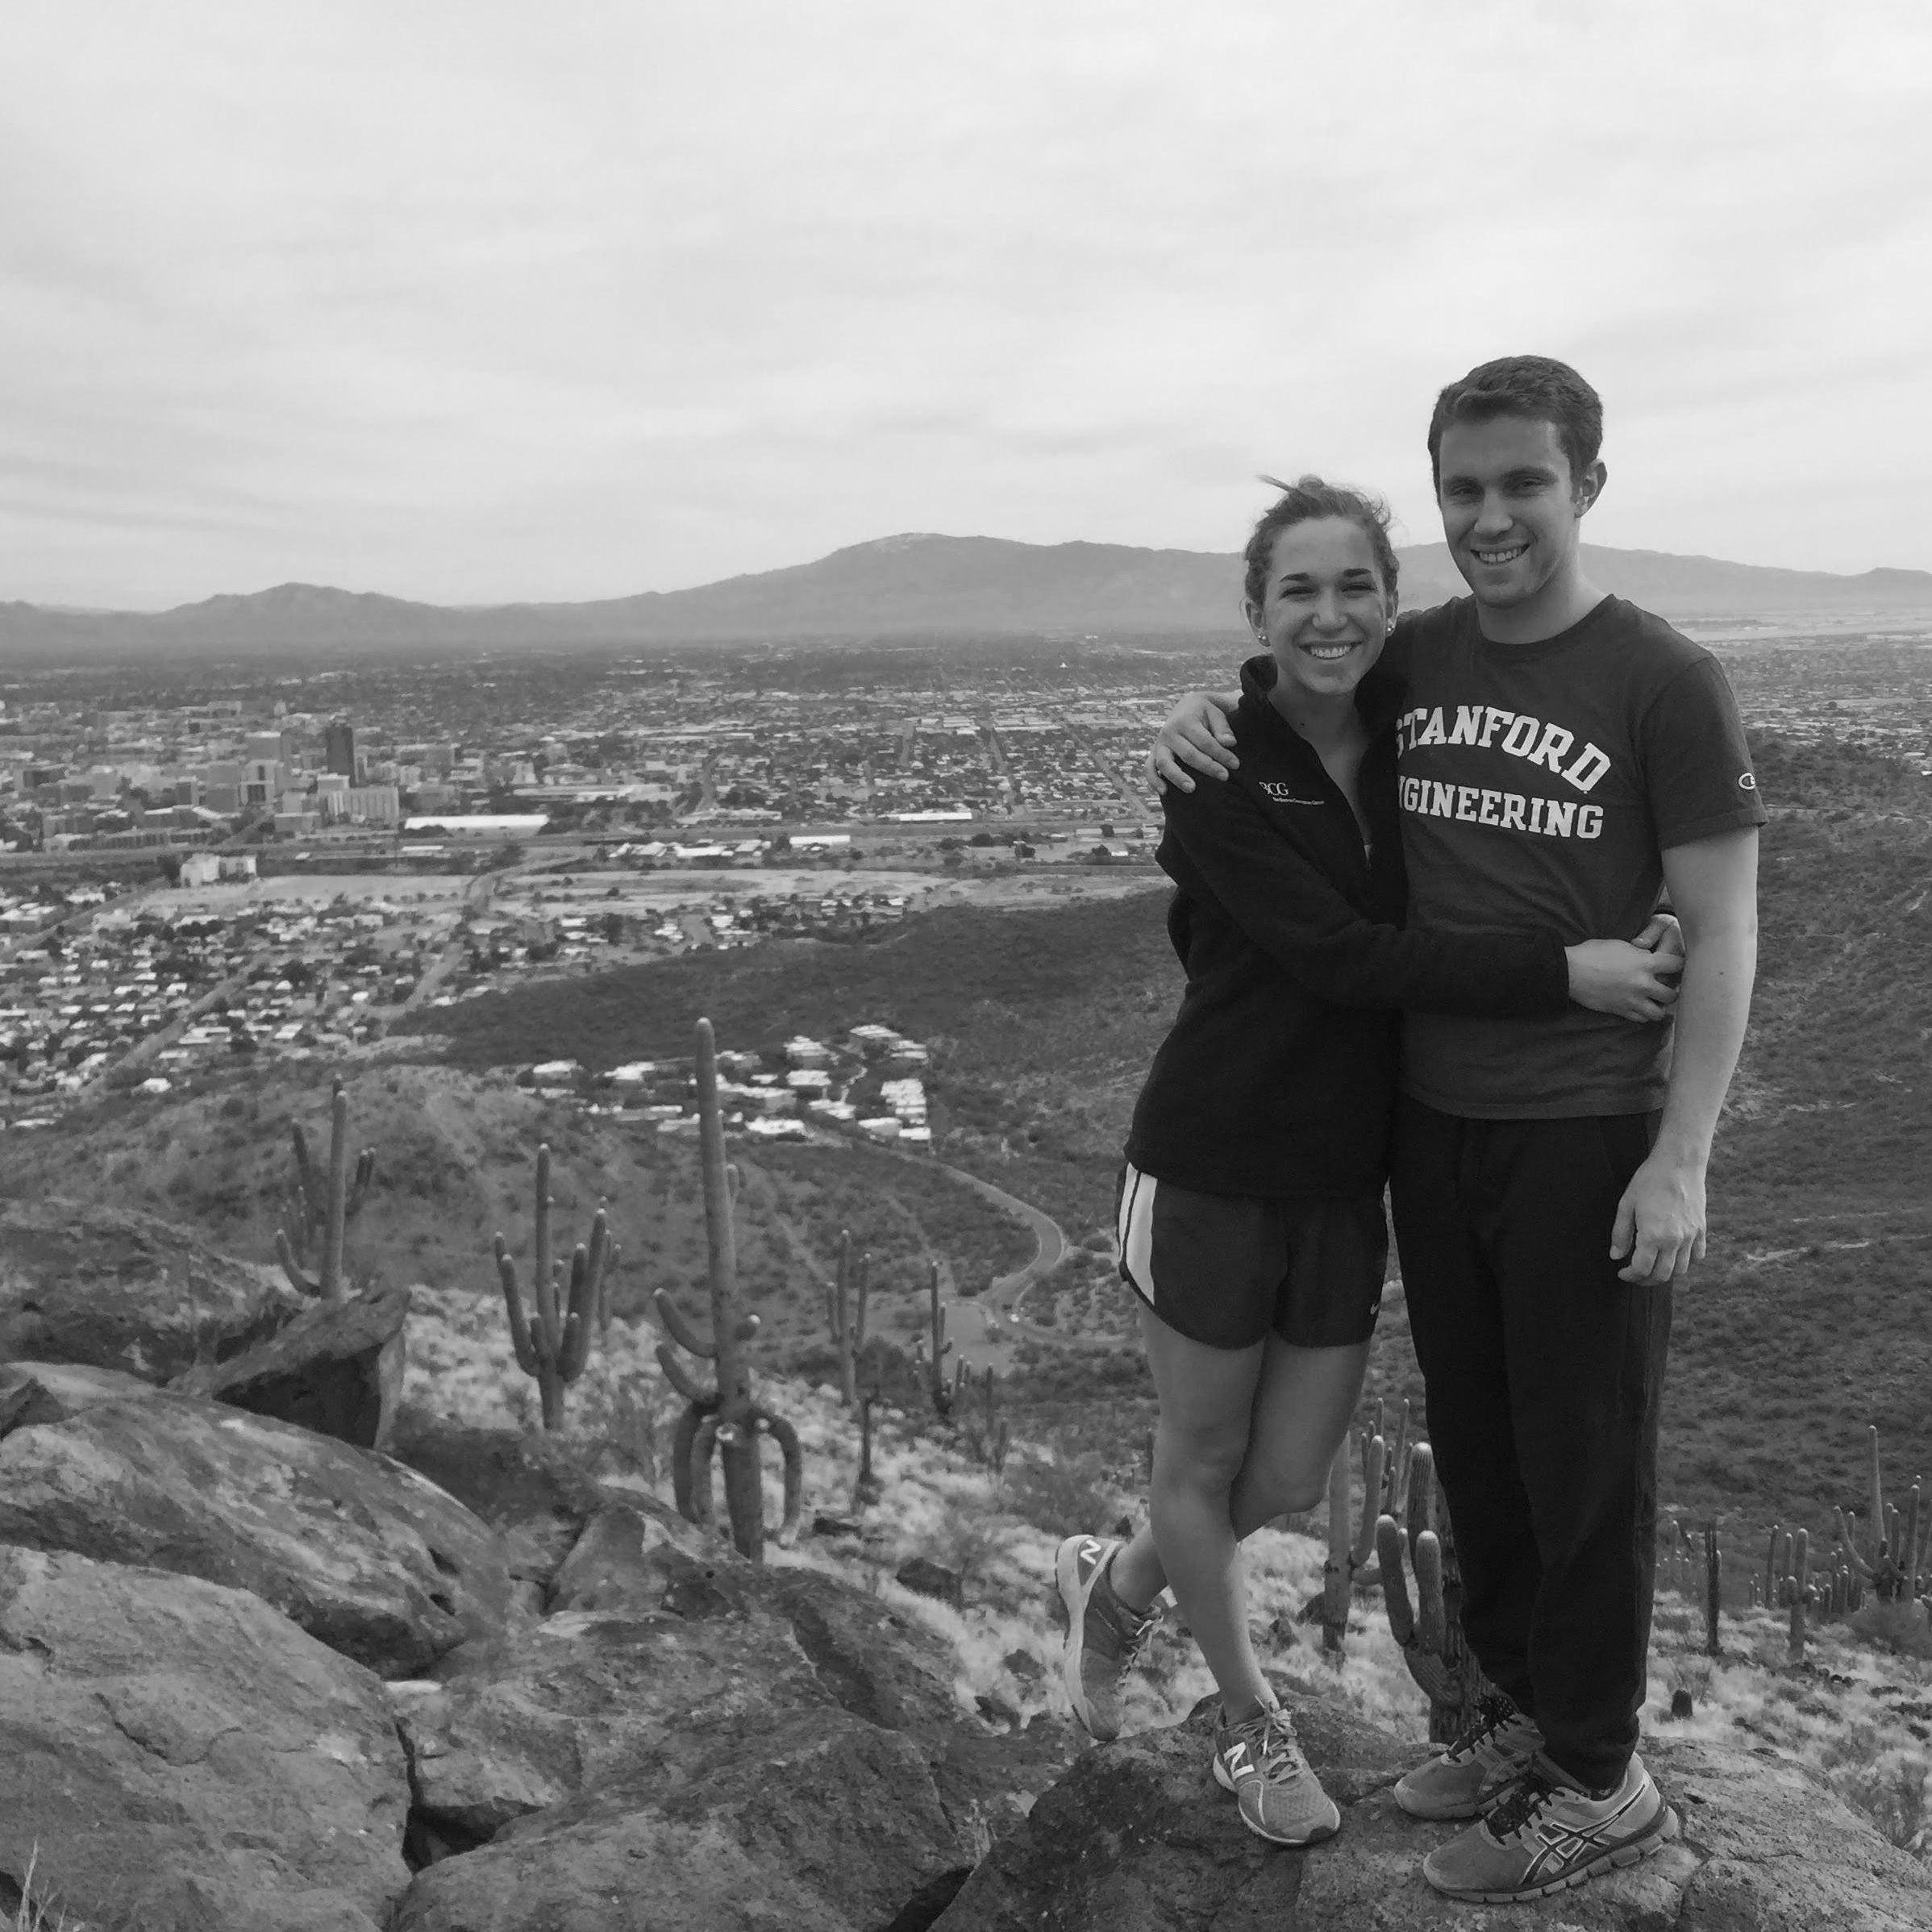 During Josh's first visit to Tucson, Elena and Josh hiked Mt Tumamoc which ends with a beautiful view of the valley.